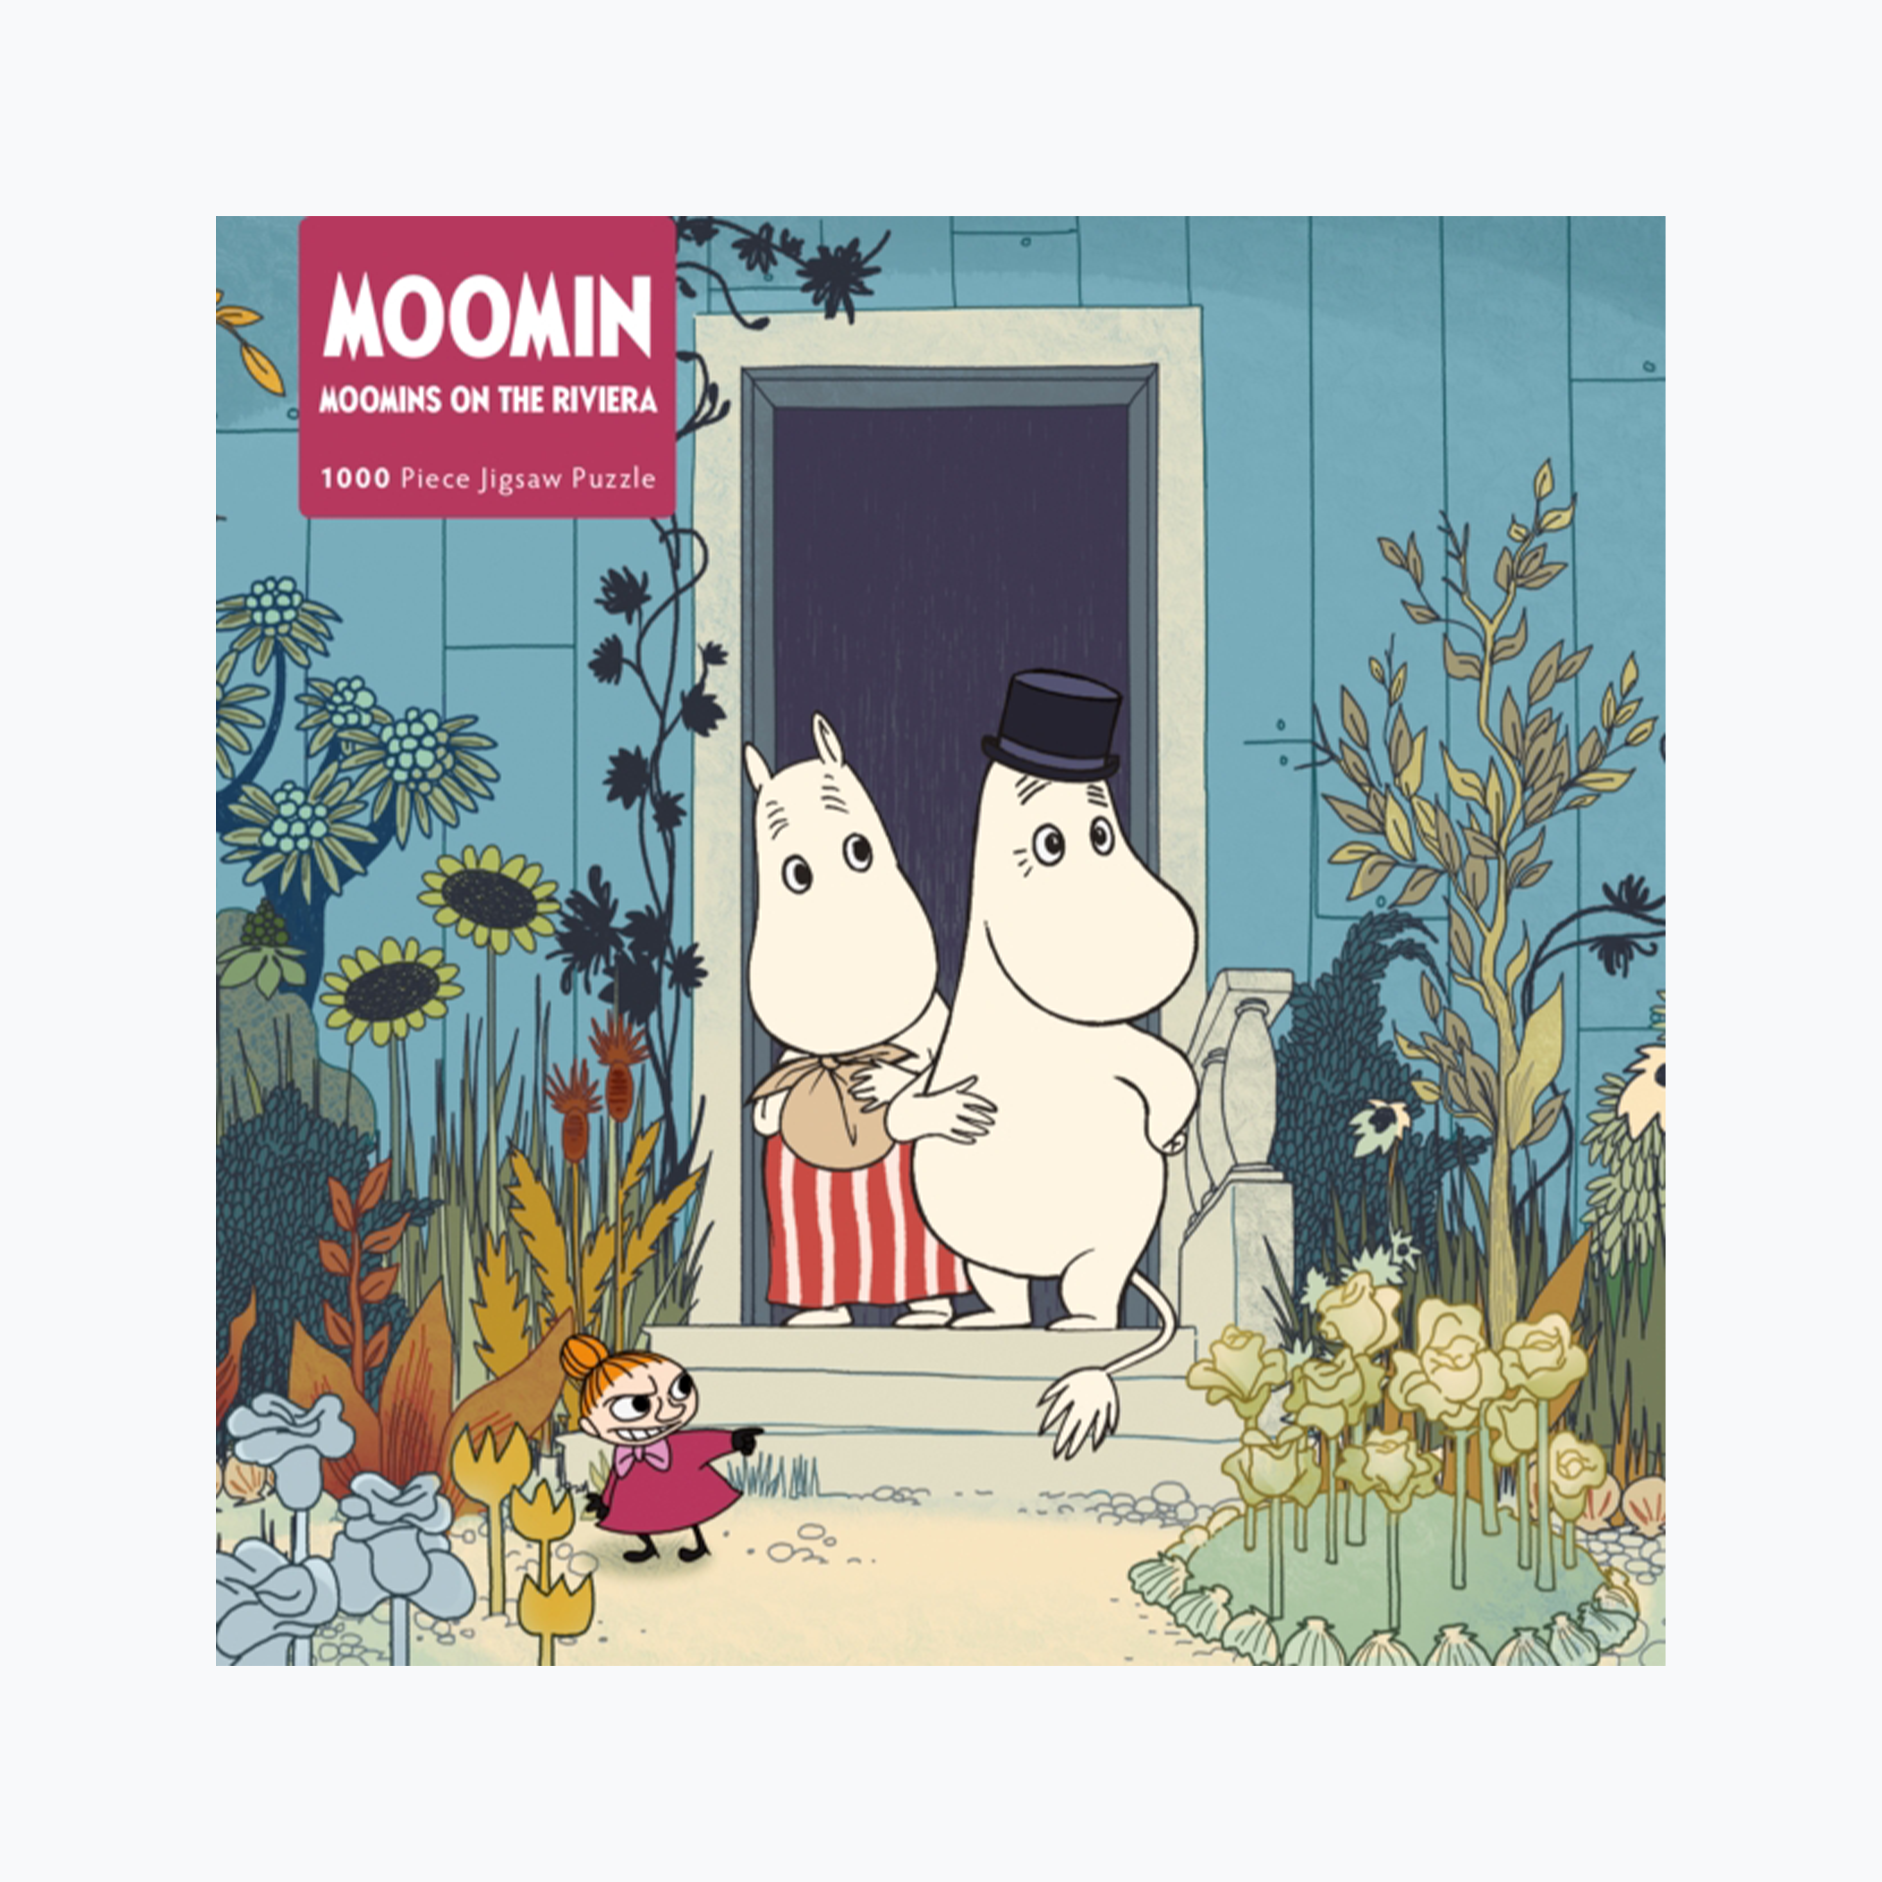 Moomin - 'Moomins on the Riviera' : 1000-piece Jigsaw Puzzles